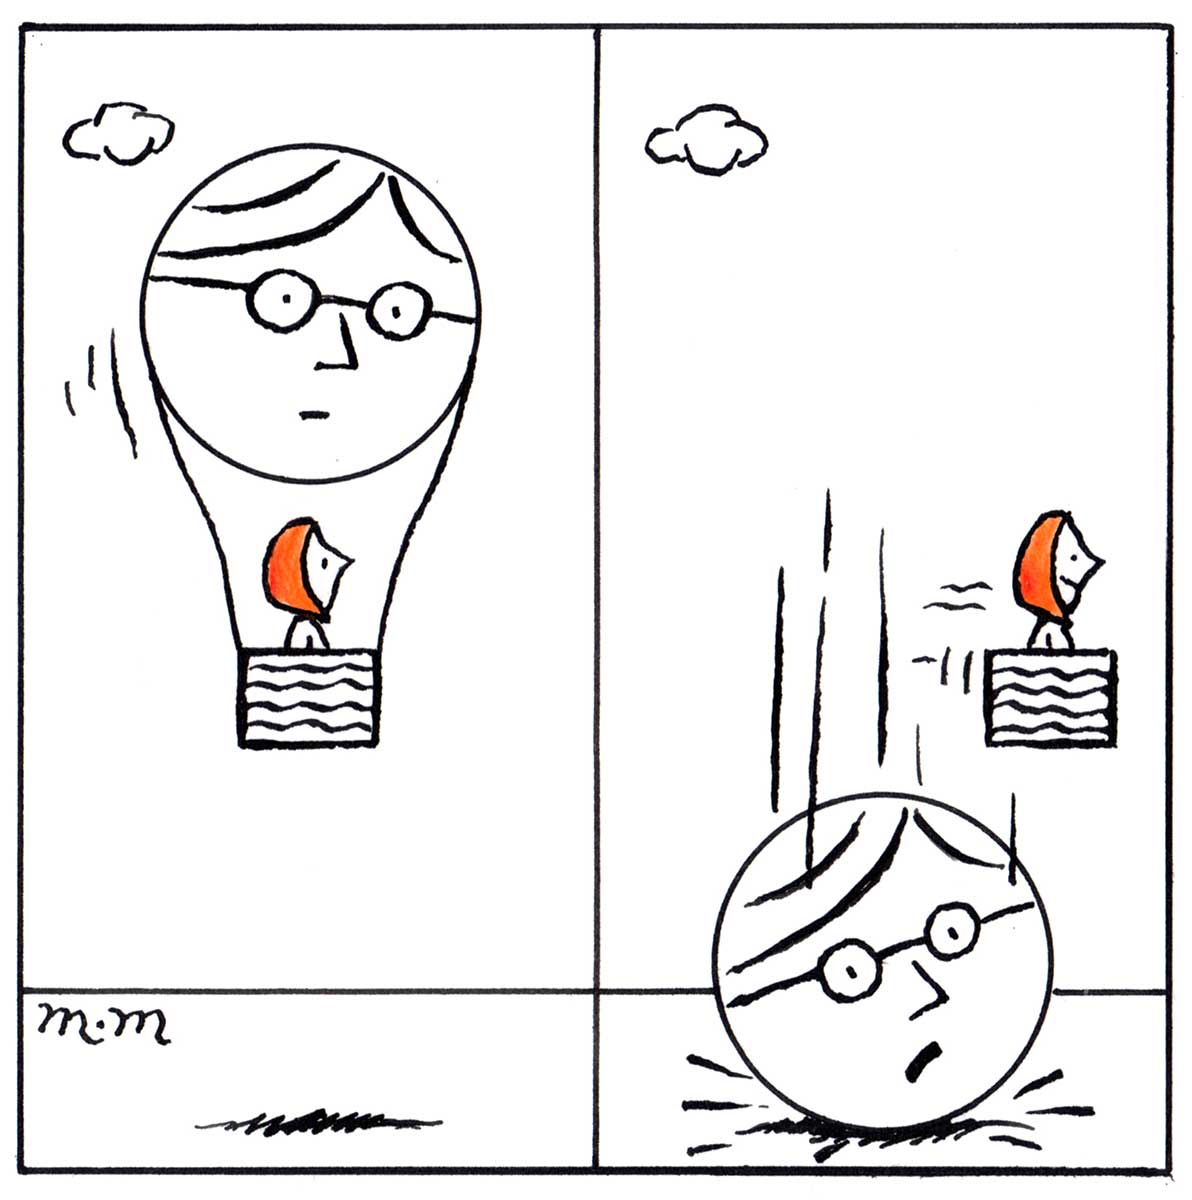 A mostly black and white cartoon that has two panels. In the left panel, Julia Gillard is seen in the basket of a balloon that drifts along just above the ground. The balloon is Kevin Rudd's head. In the right panel, the balloon has detached from the basket and fallen to the ground. There is an expression of shock on Rudd's face. The basket with Gillard continues to drift along above the ground. A smile plays across her face. - click to view larger image